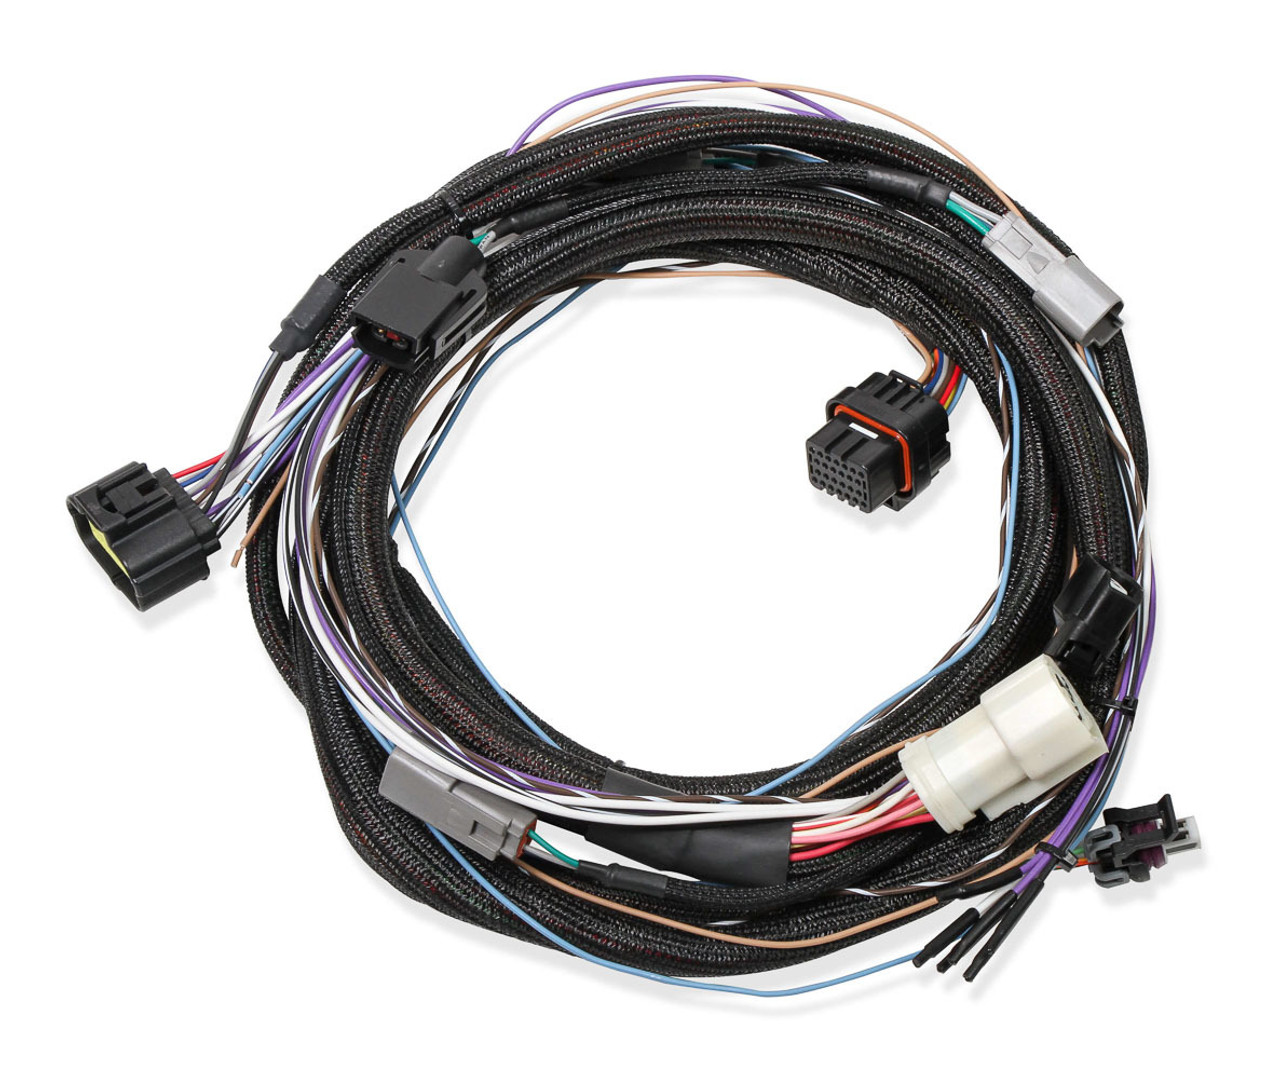 Holley Trans Wire Harness Ford 4R70W/4R75W  1998-Up